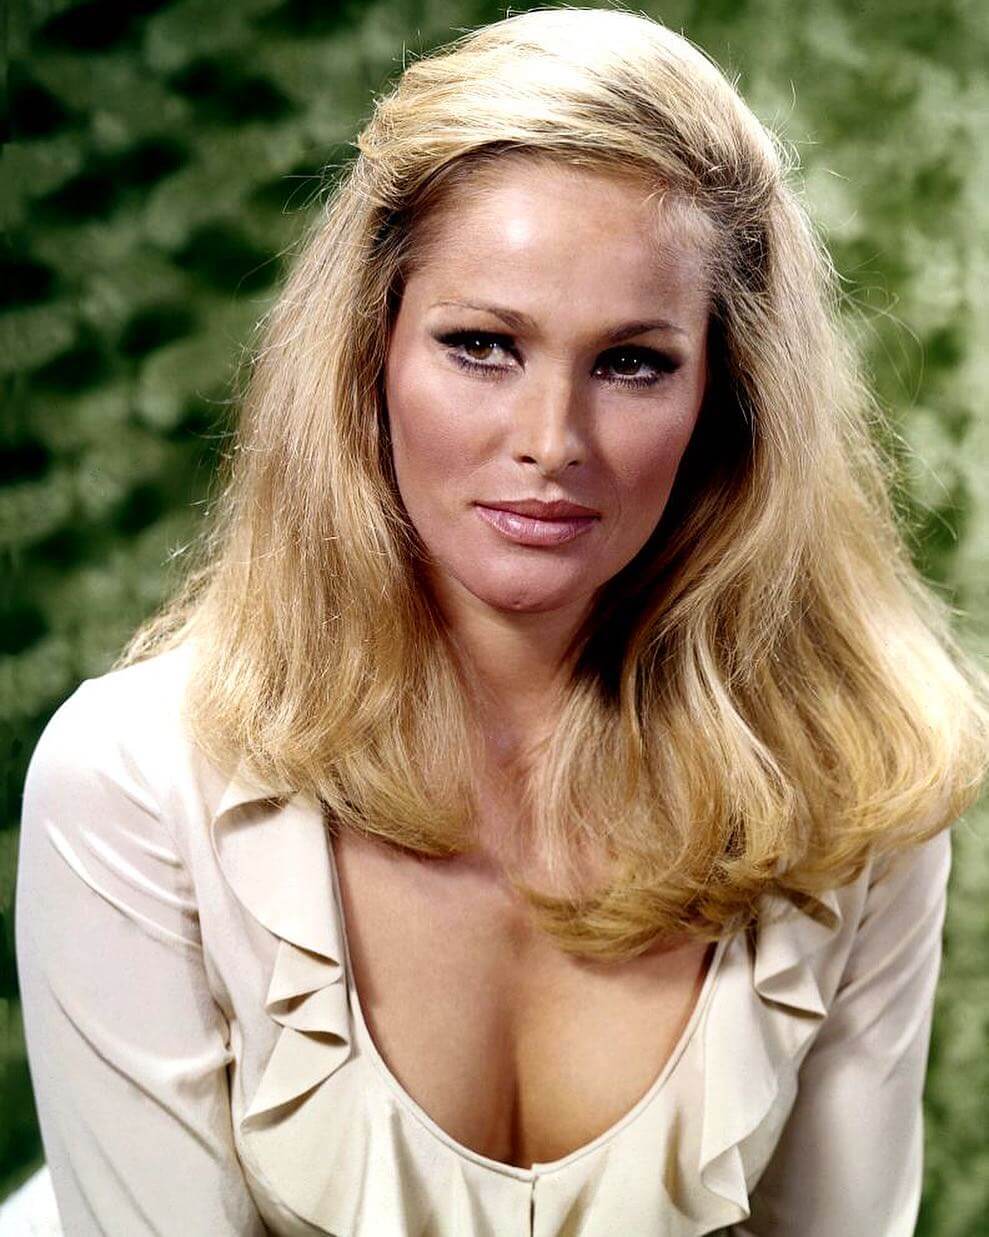 65+ Hot Pictures Of Ursula Andress That Will Make You Drool | Best Of Comic Books